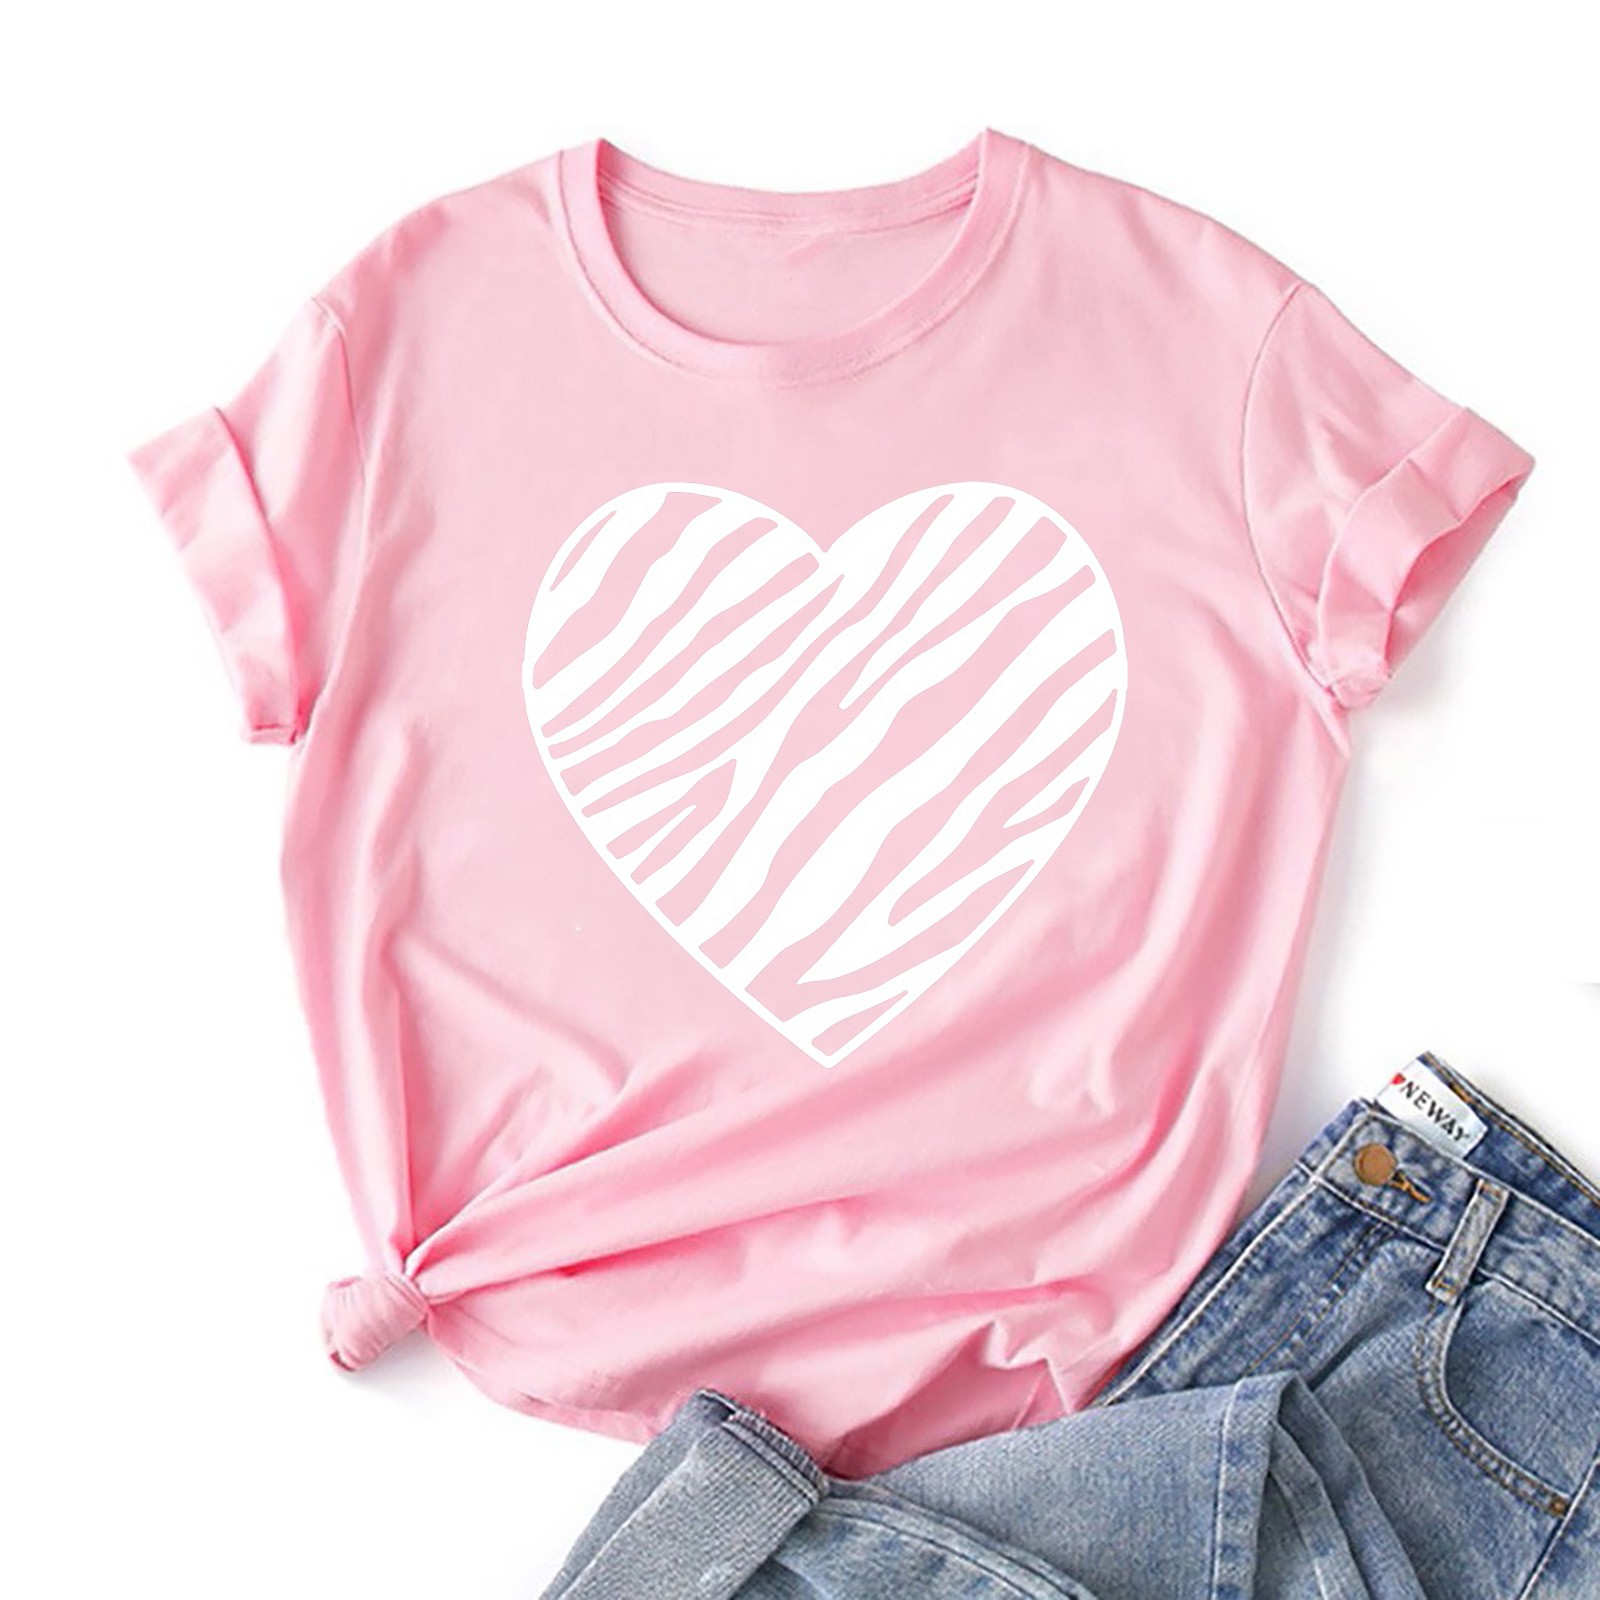 Valentines Day T Shirts for Women Plus Size Shirt Love Heart Print ...